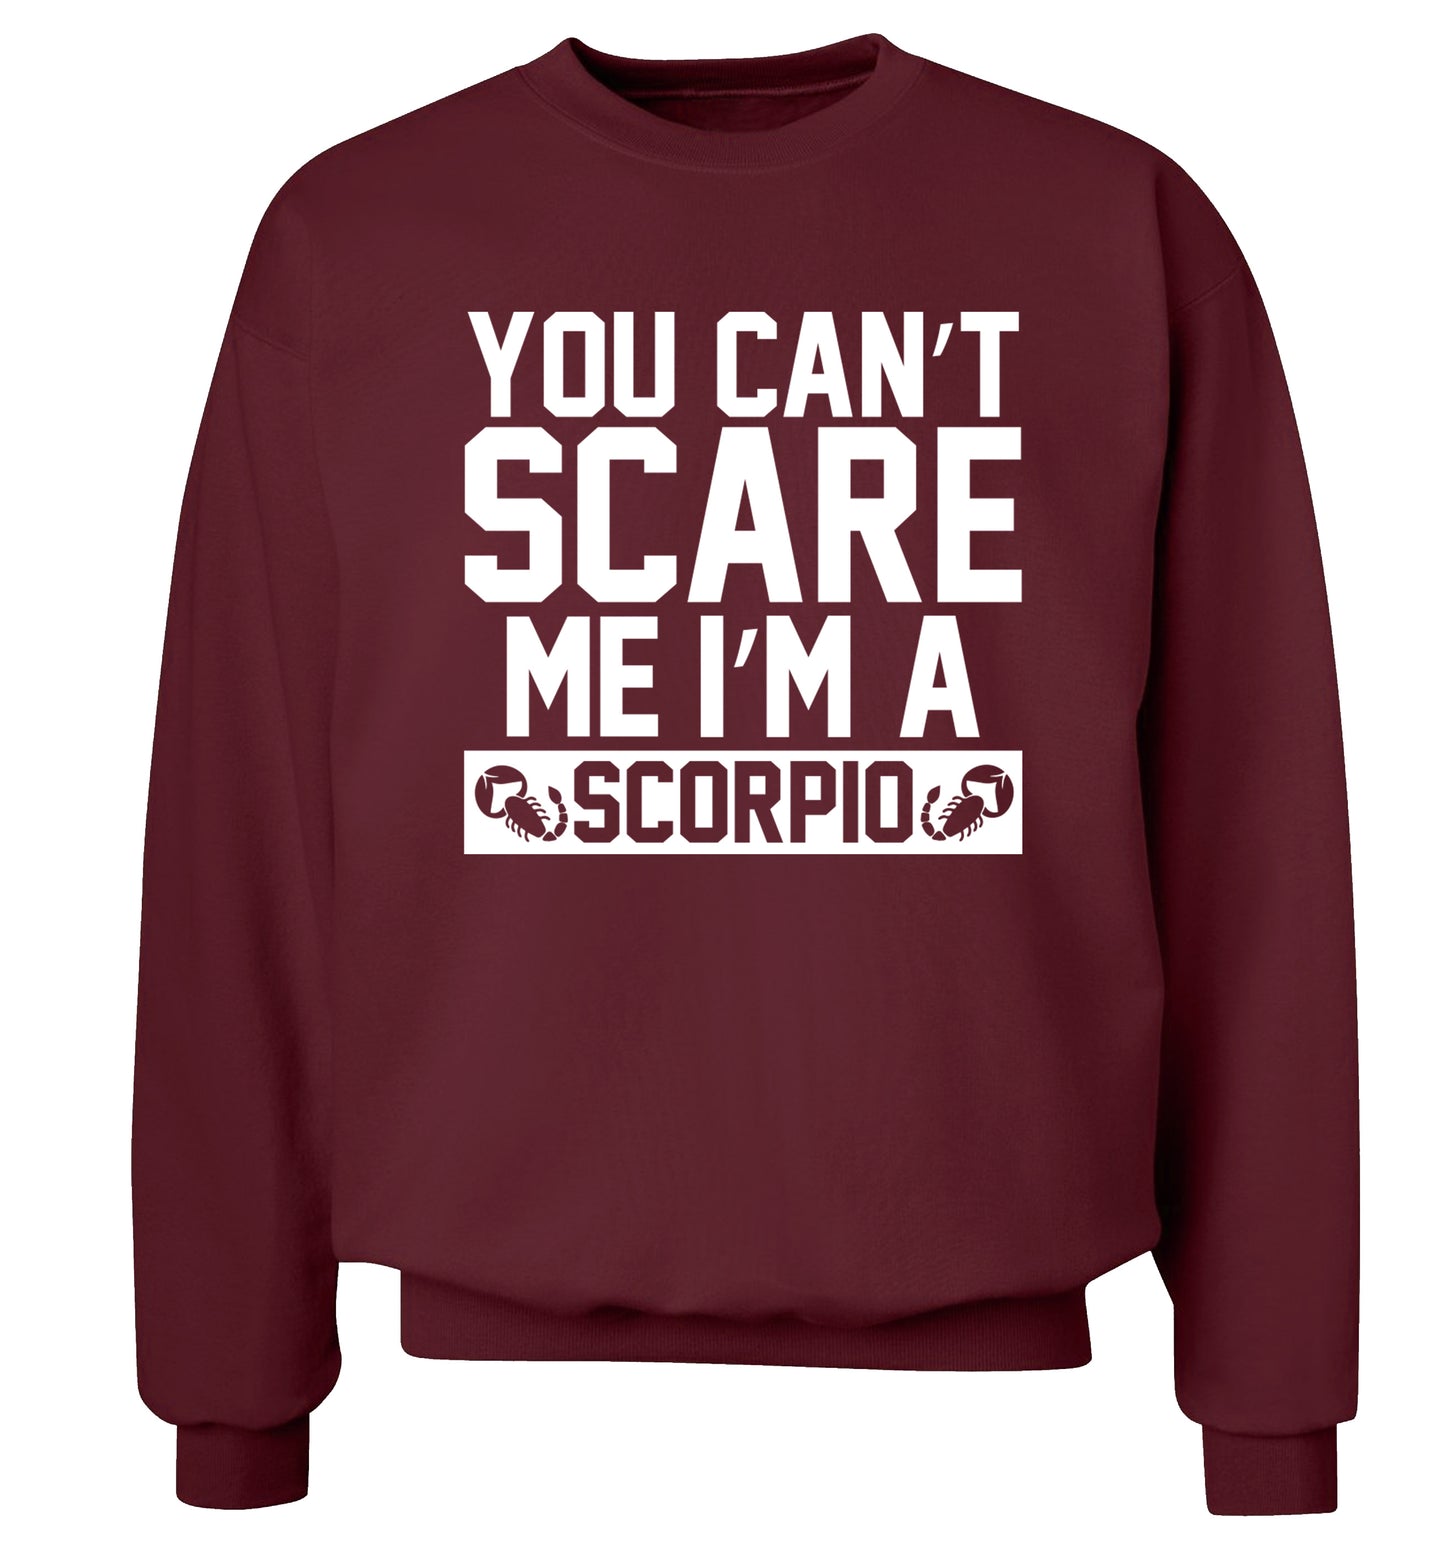 You can't scare me I'm a scorpio Adult's unisex maroon Sweater 2XL